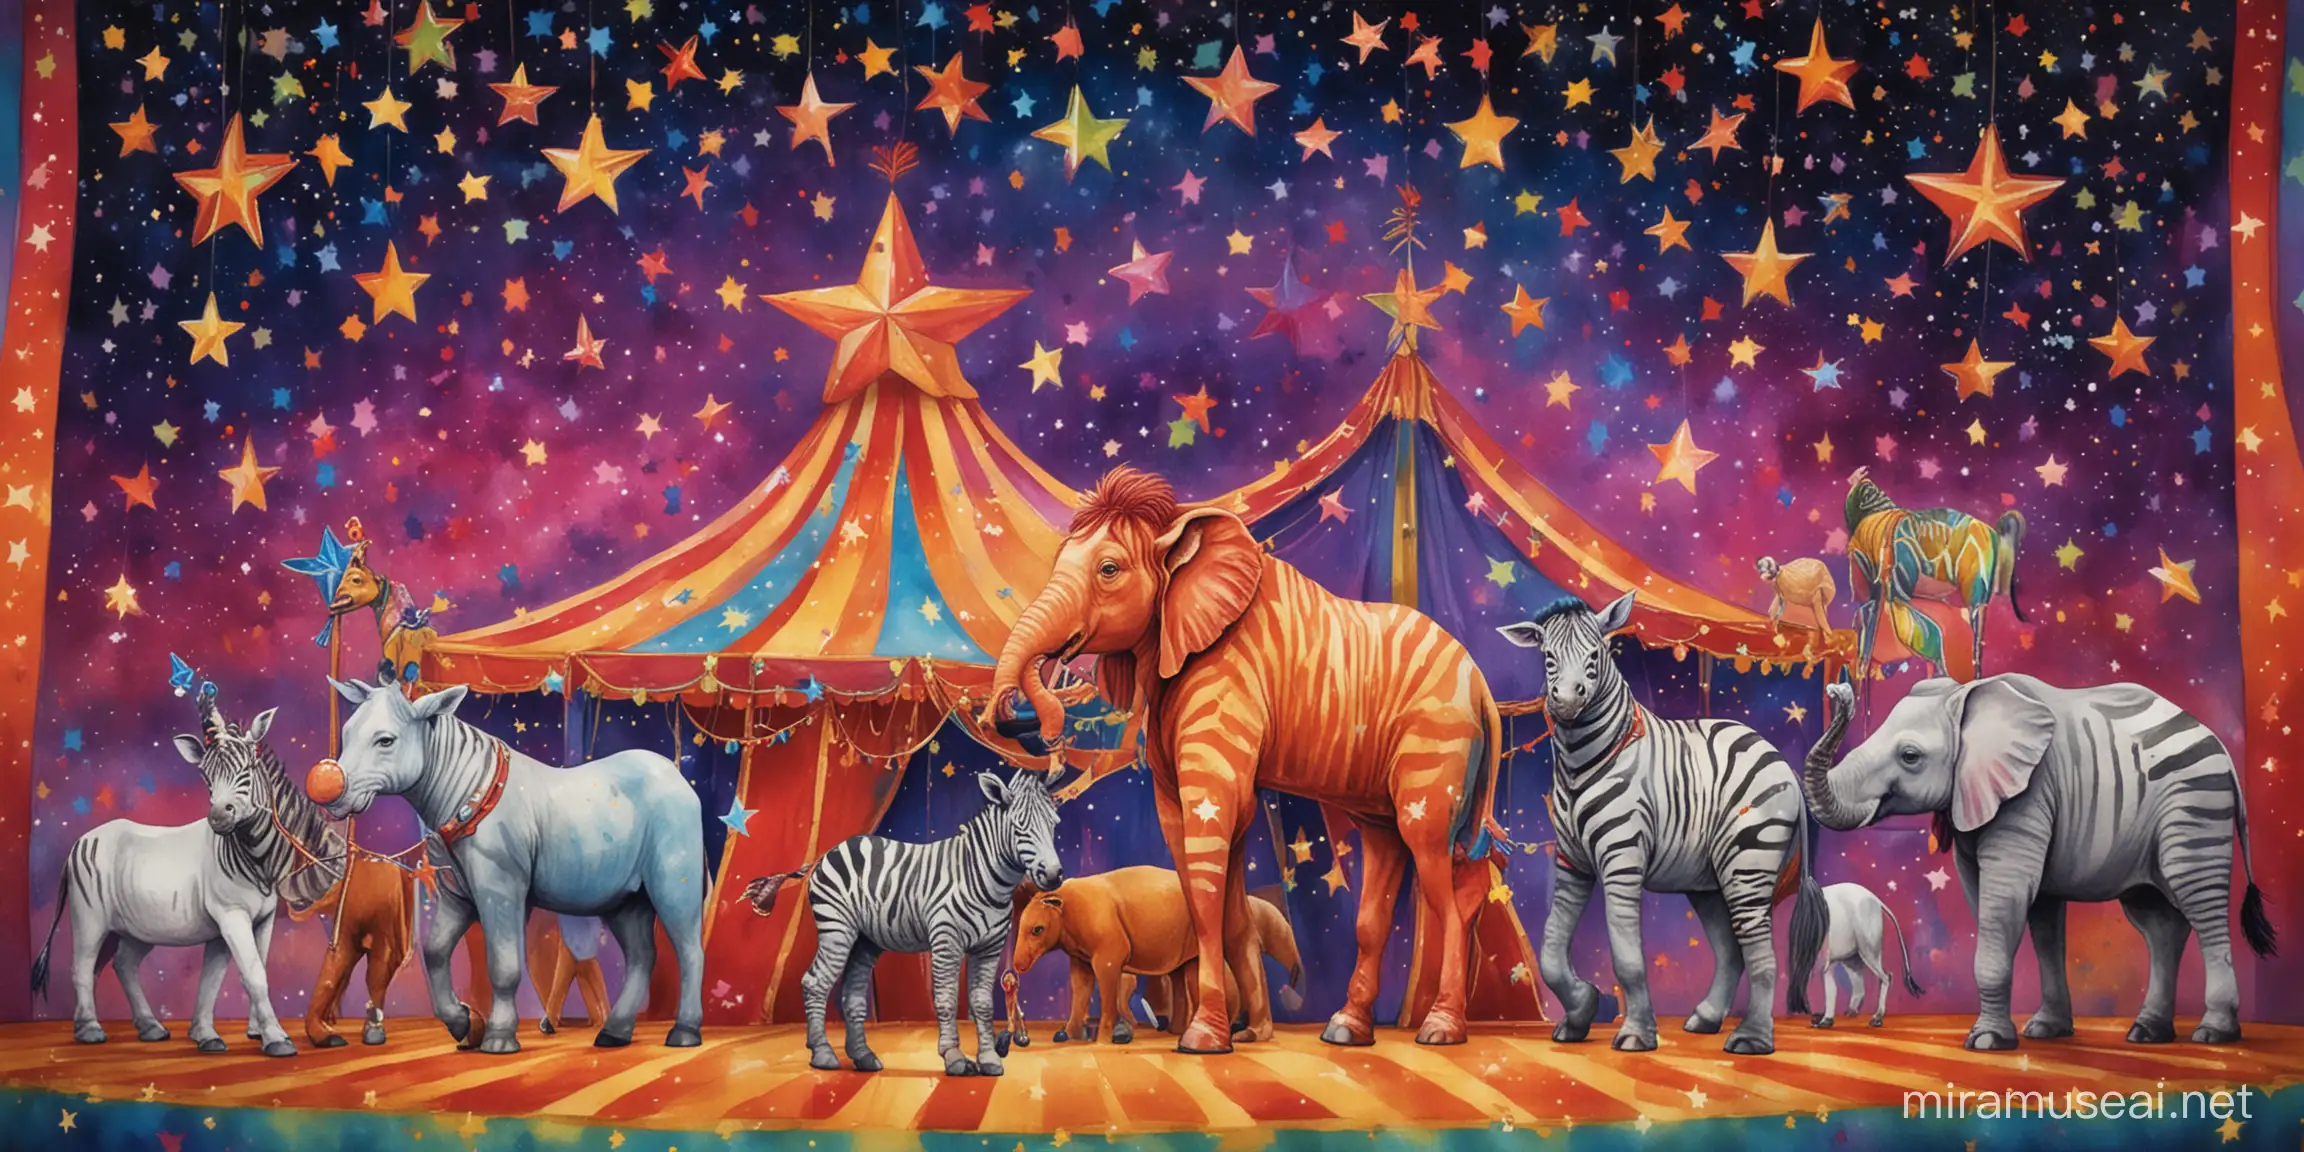 Whimsical Circus Animals with Colorful Stars in the Background